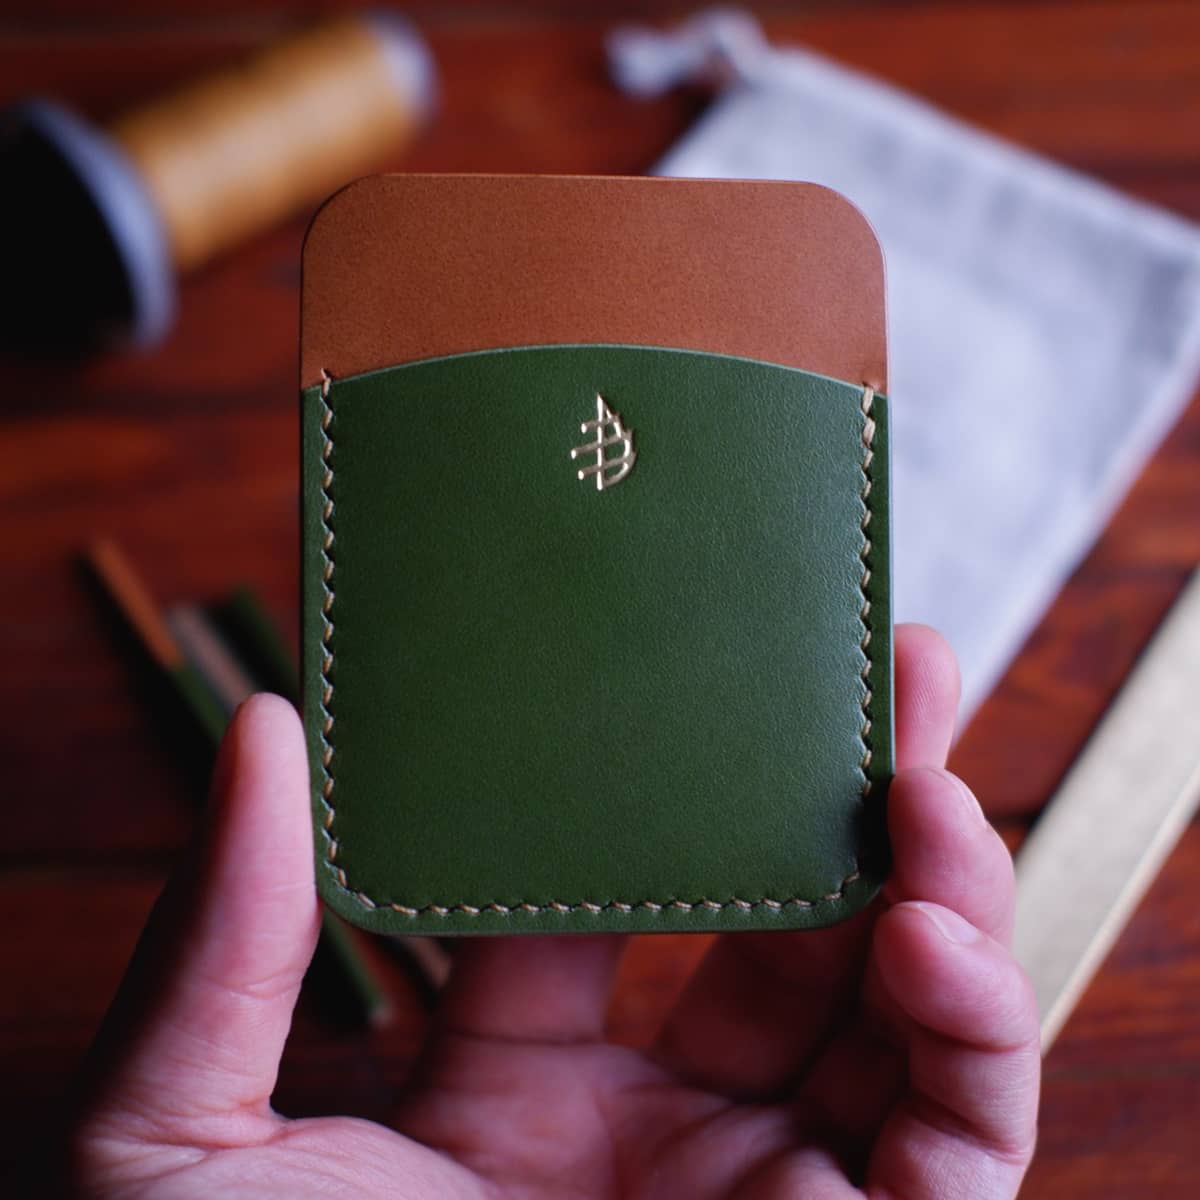 The Palm Card Holder with gold foil stamped Damn Pine logo held in hand